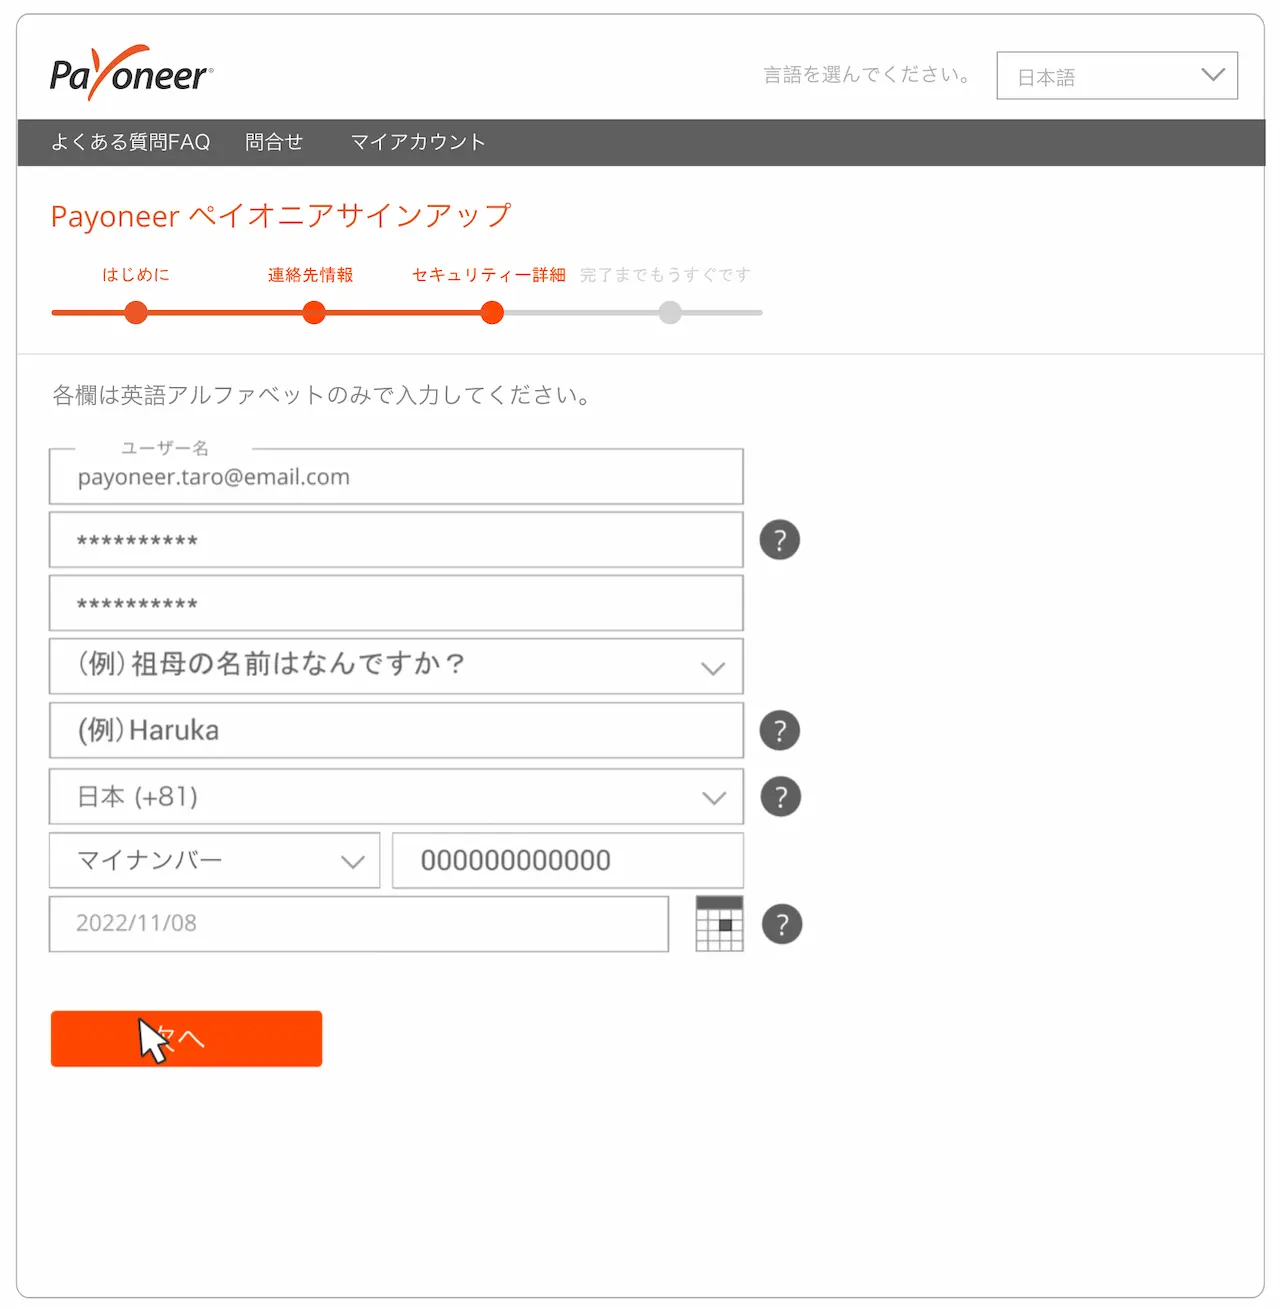 HowTo-Register-Payoneer-Account_03